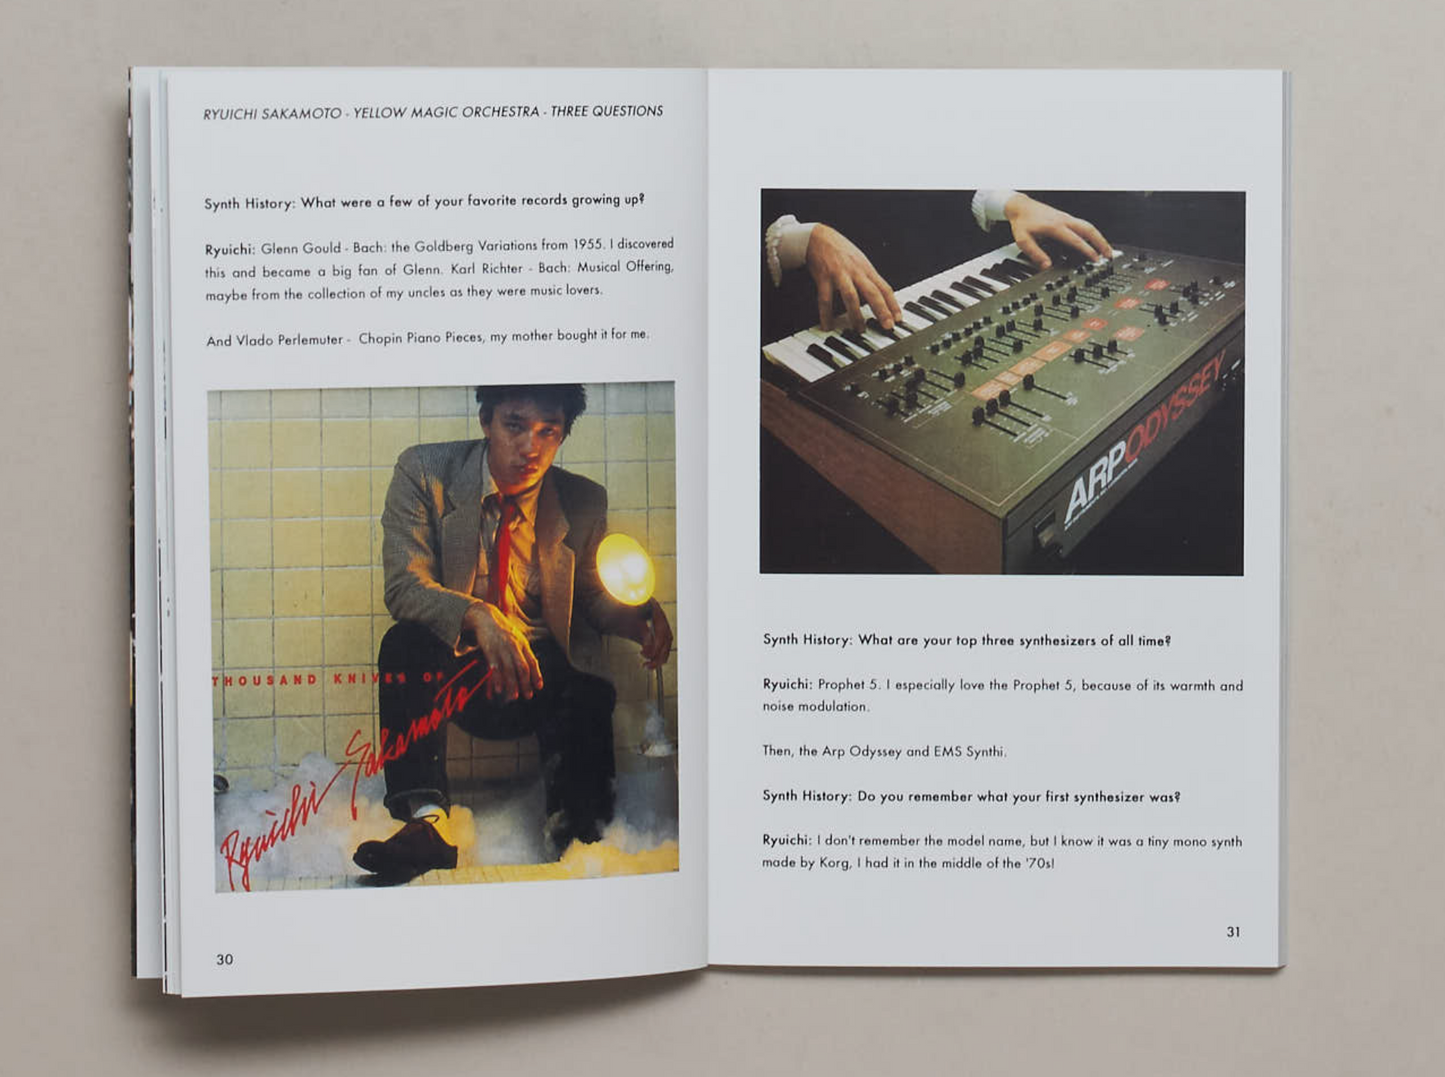 Synth History Zine - Issue 2